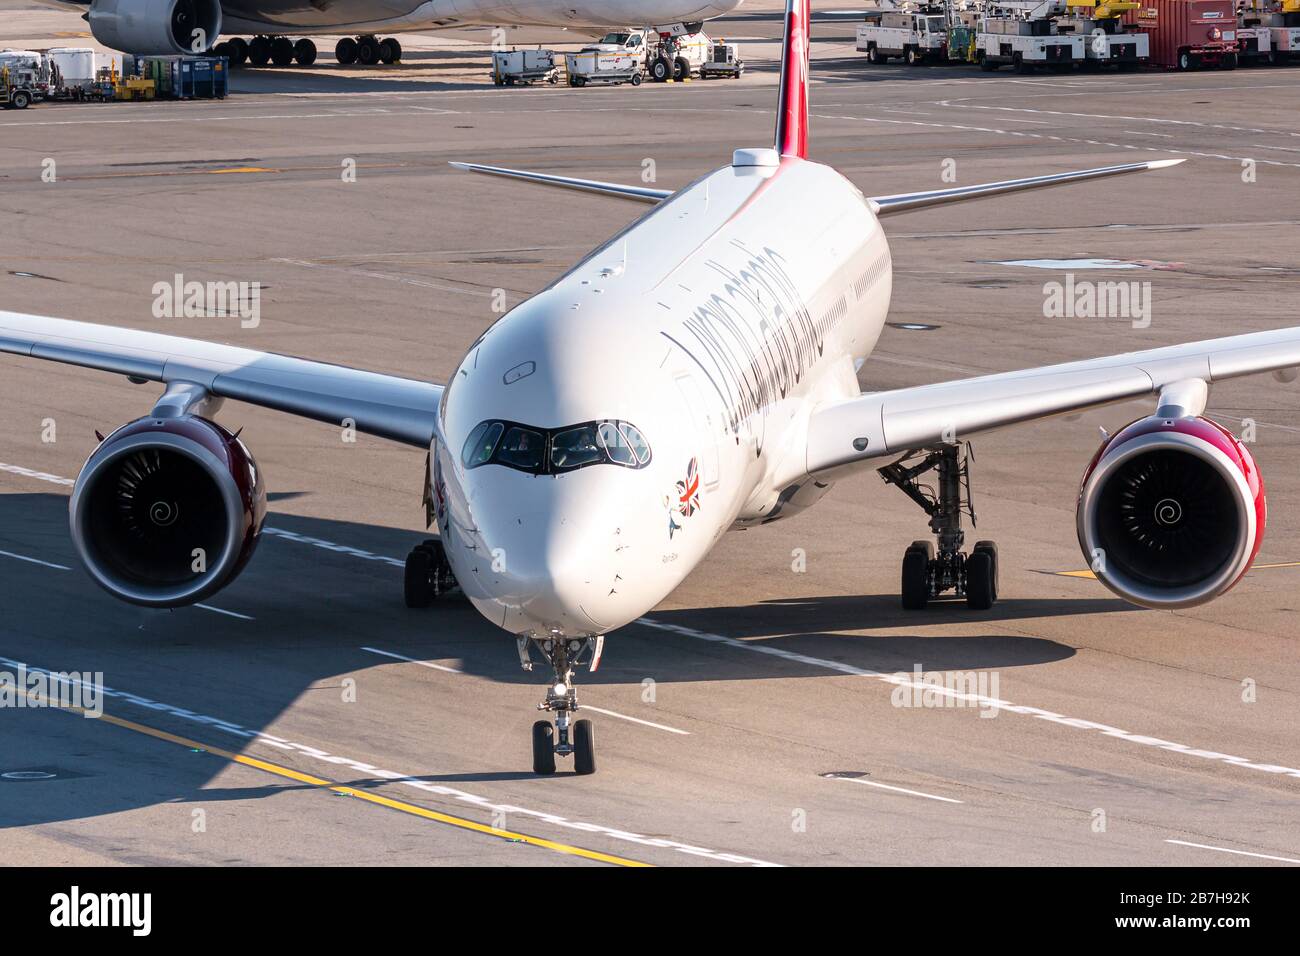 New York, USA - February 27, 2020: Virgin Atlantic Airbus A350-1000 airplane at New York John F. Kennedy airport (JFK) in the USA. Airbus is an aircra Stock Photo